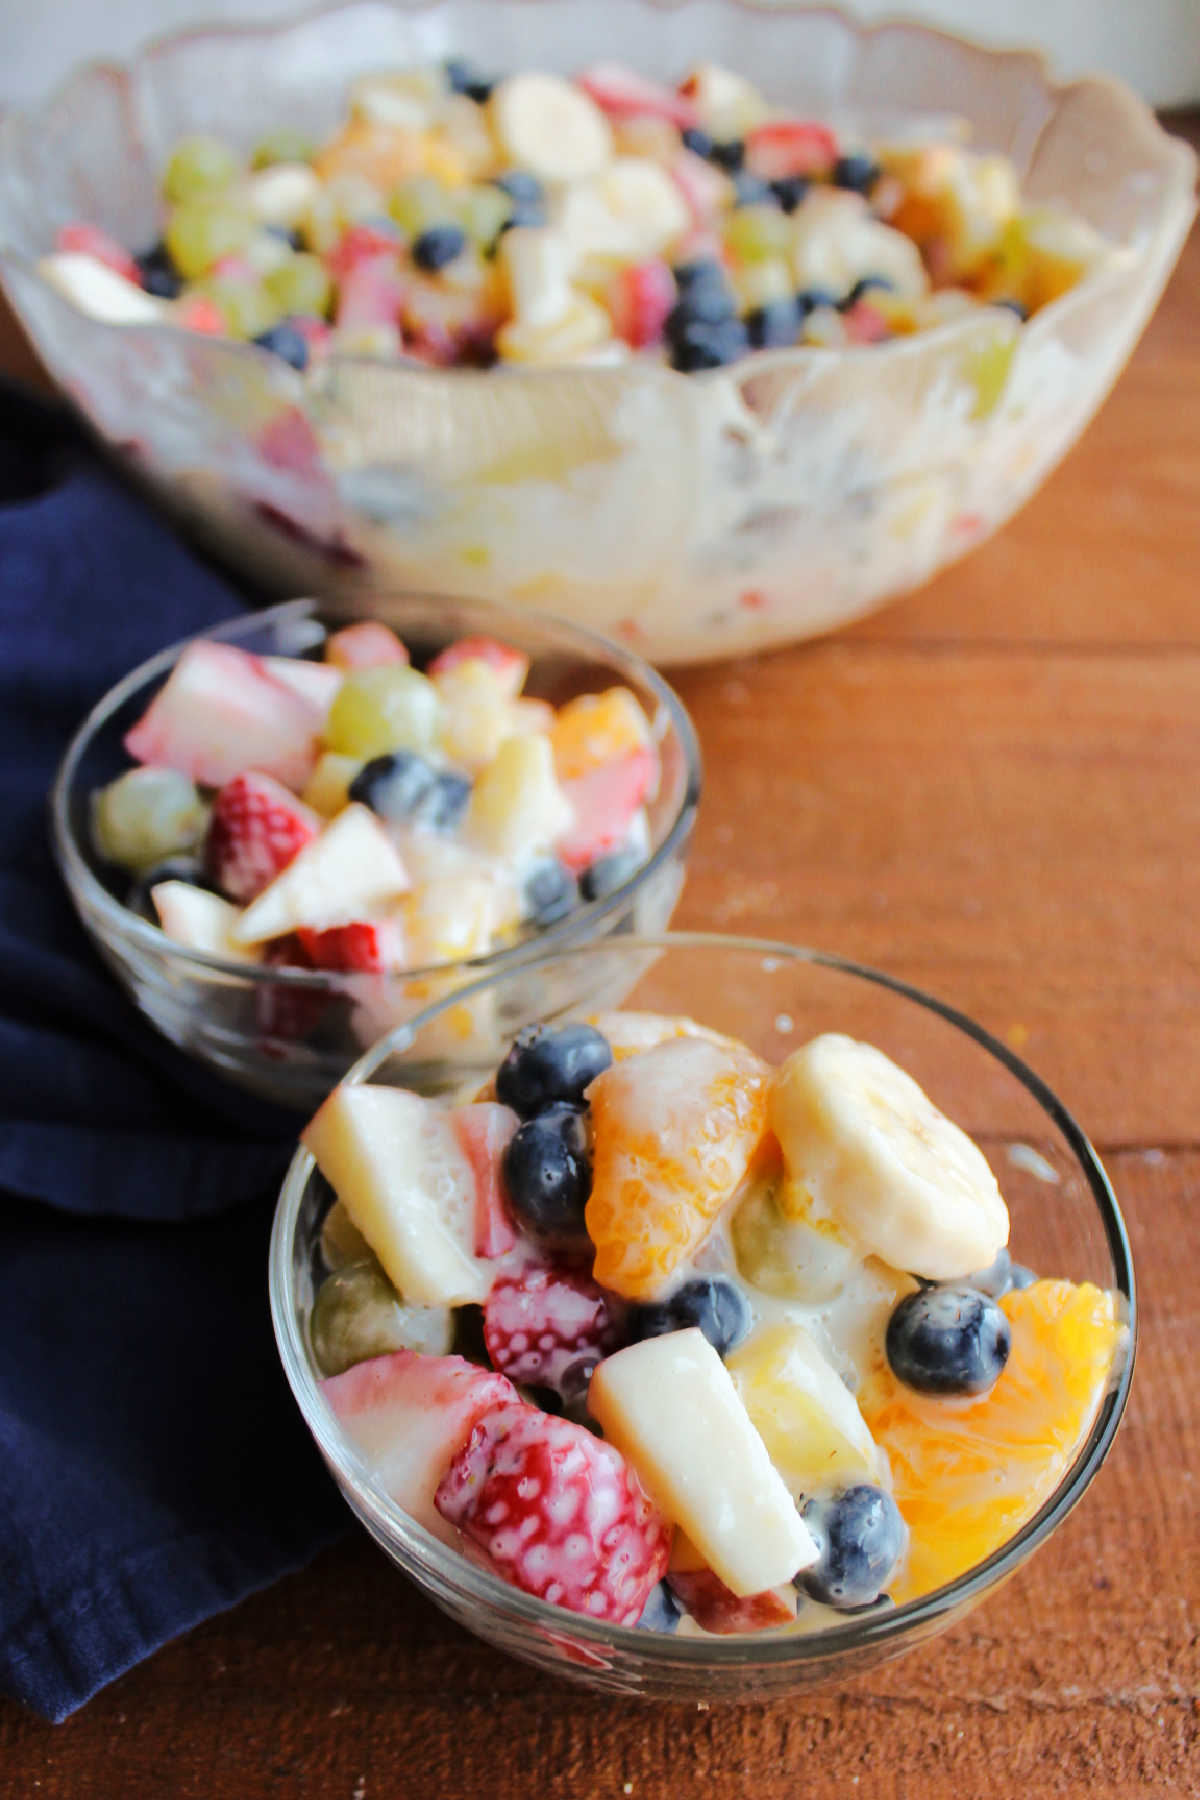 Looking down on small glass bowls filled with creamy fruit salad with condensed milk.